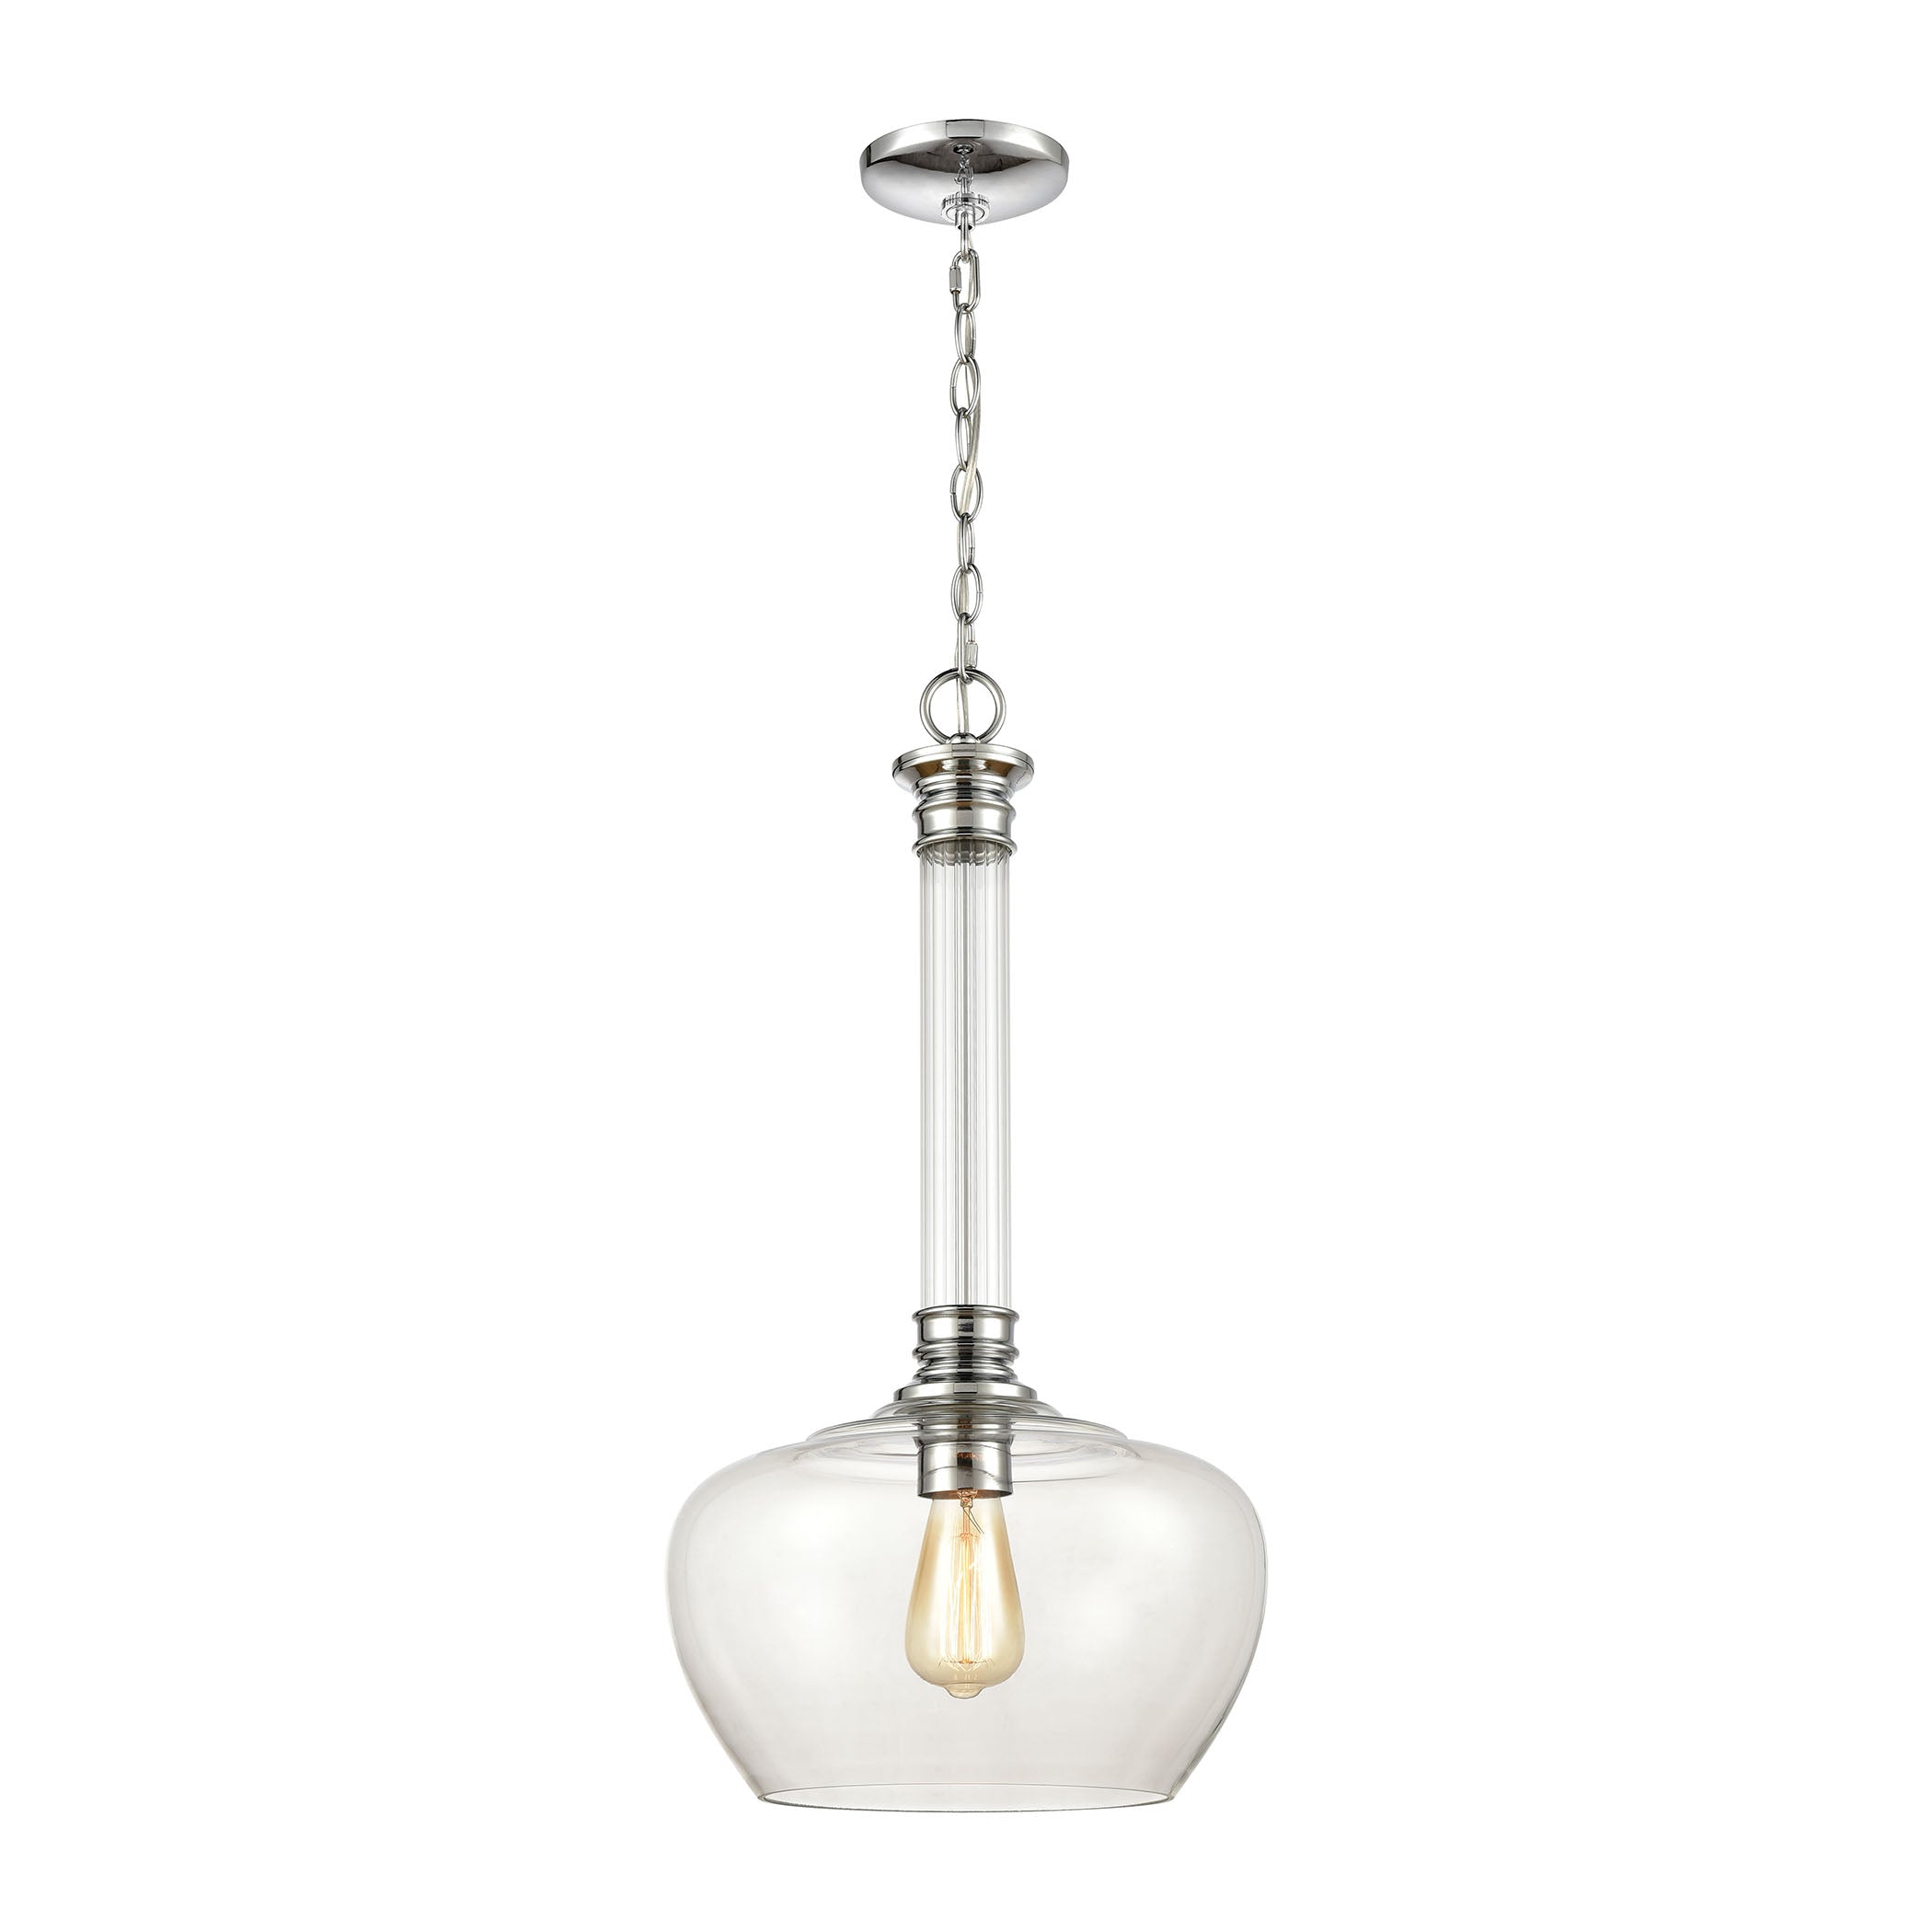 ELK Lighting 46845/1 Glasgow 1-Light Pendant in Polished Chrome with Clear Glass